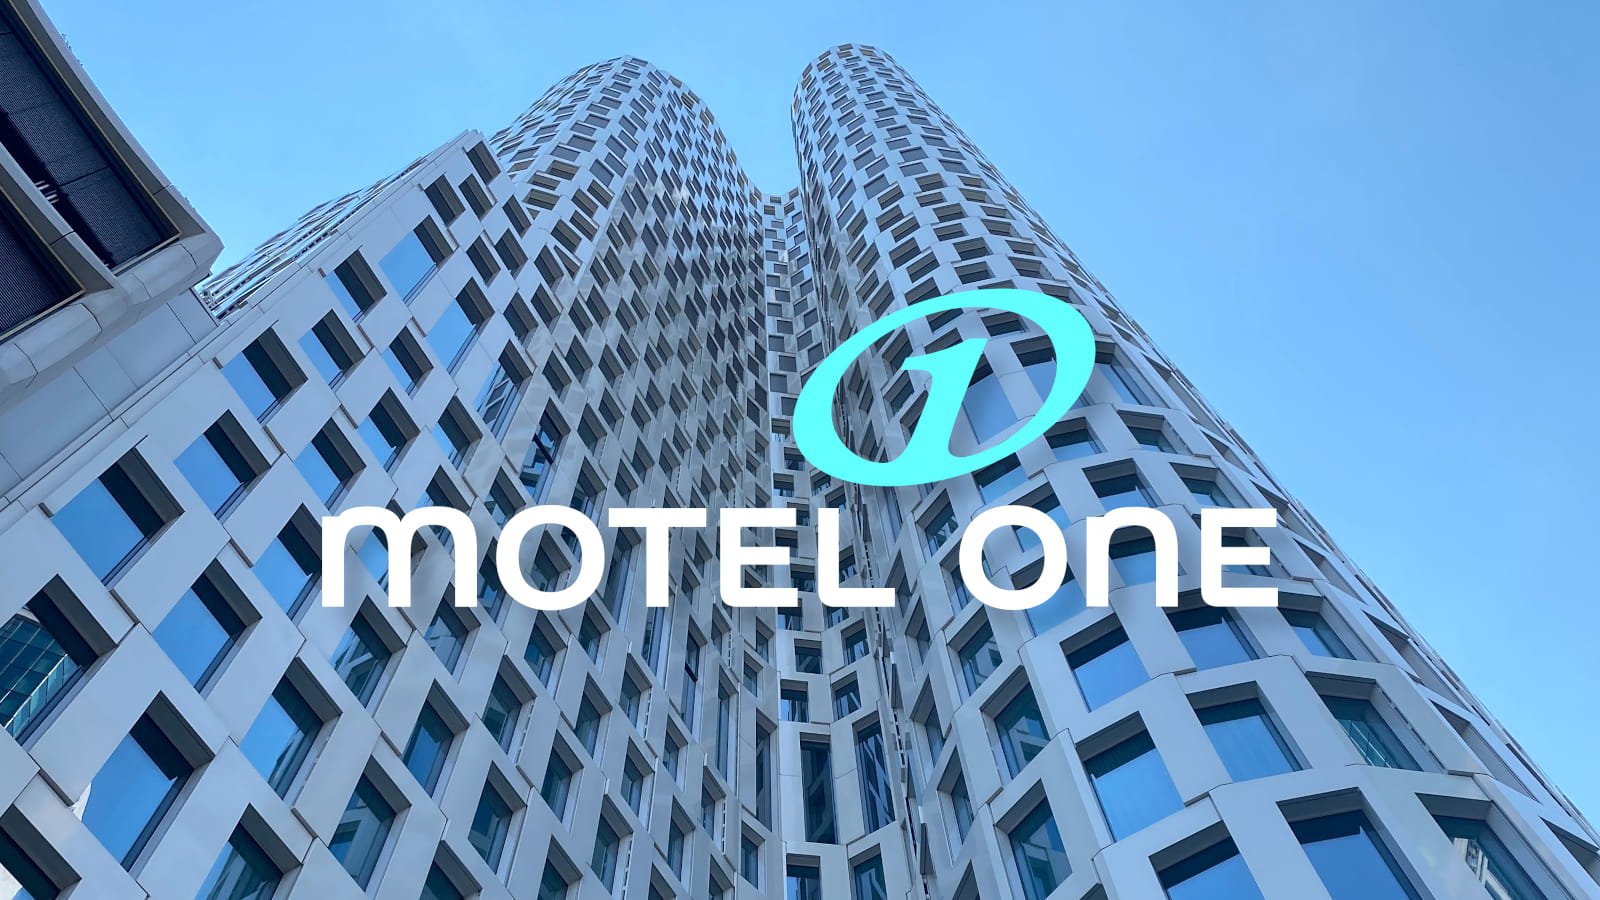 Motel One logo in front of a tall building amidst devastating ransomware assault.